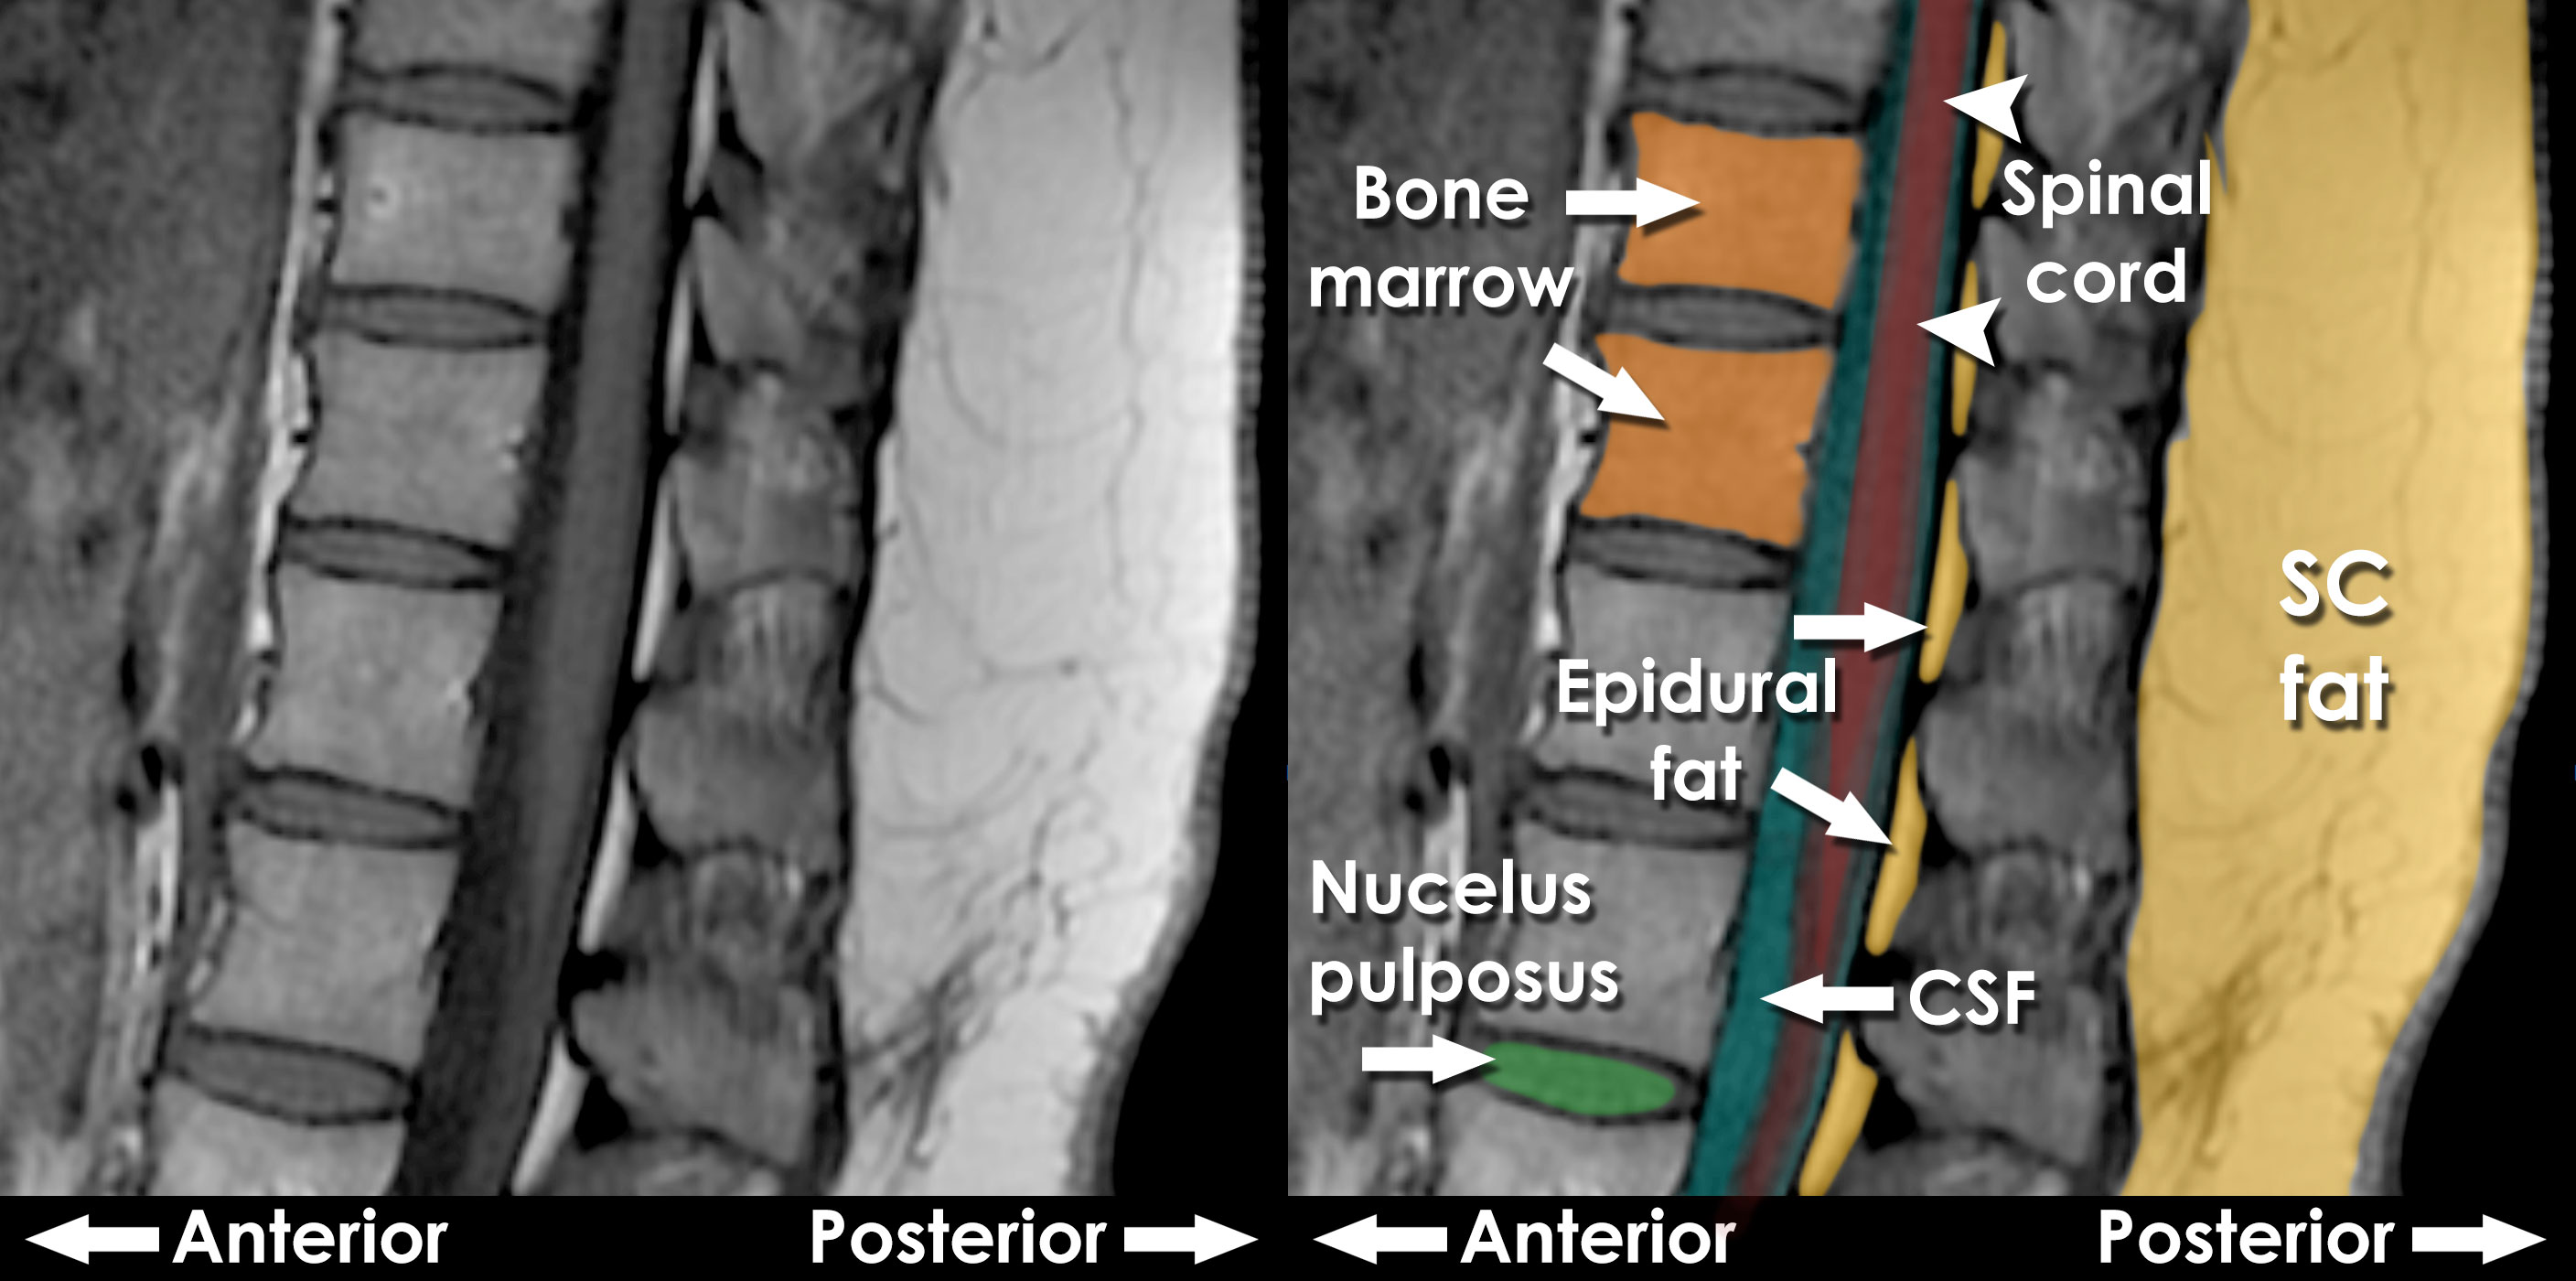 https://www.radiologymasterclass.co.uk/images/mri/mri_spine_normal_t1.jpg?mtime=20210304211353&focal=none